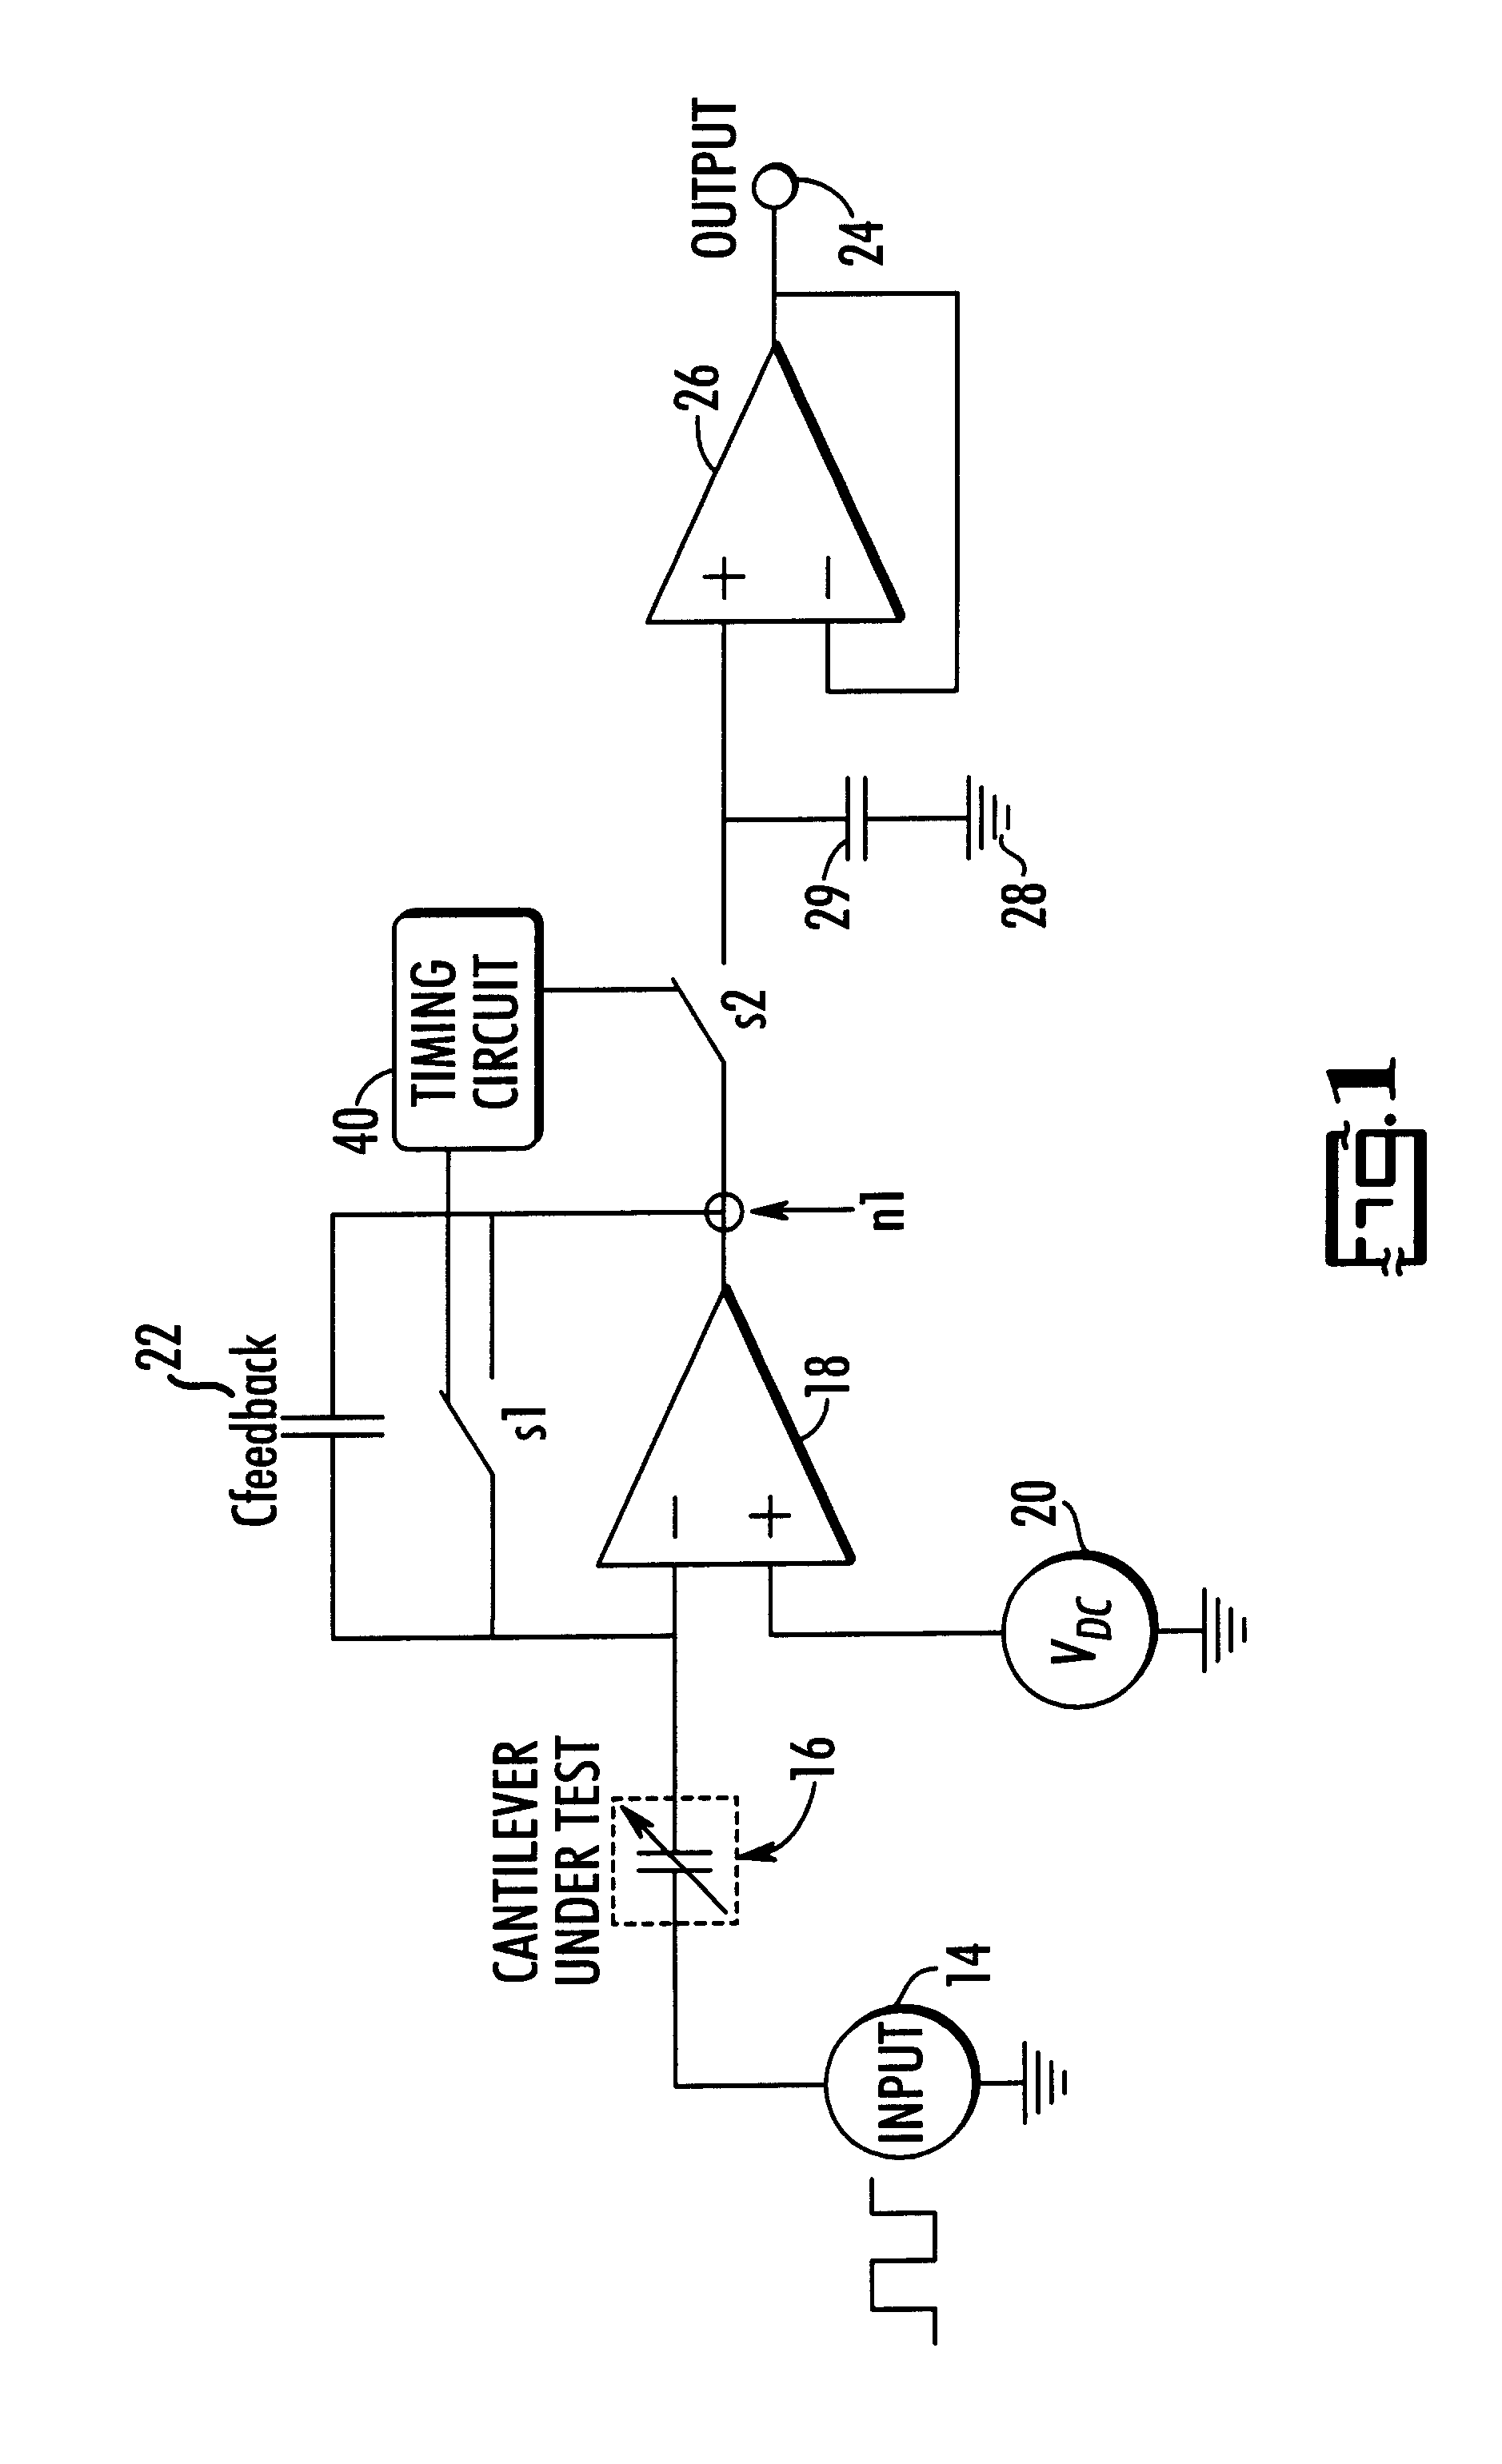 Capacitively readout multi-element sensor array with common-mode cancellation